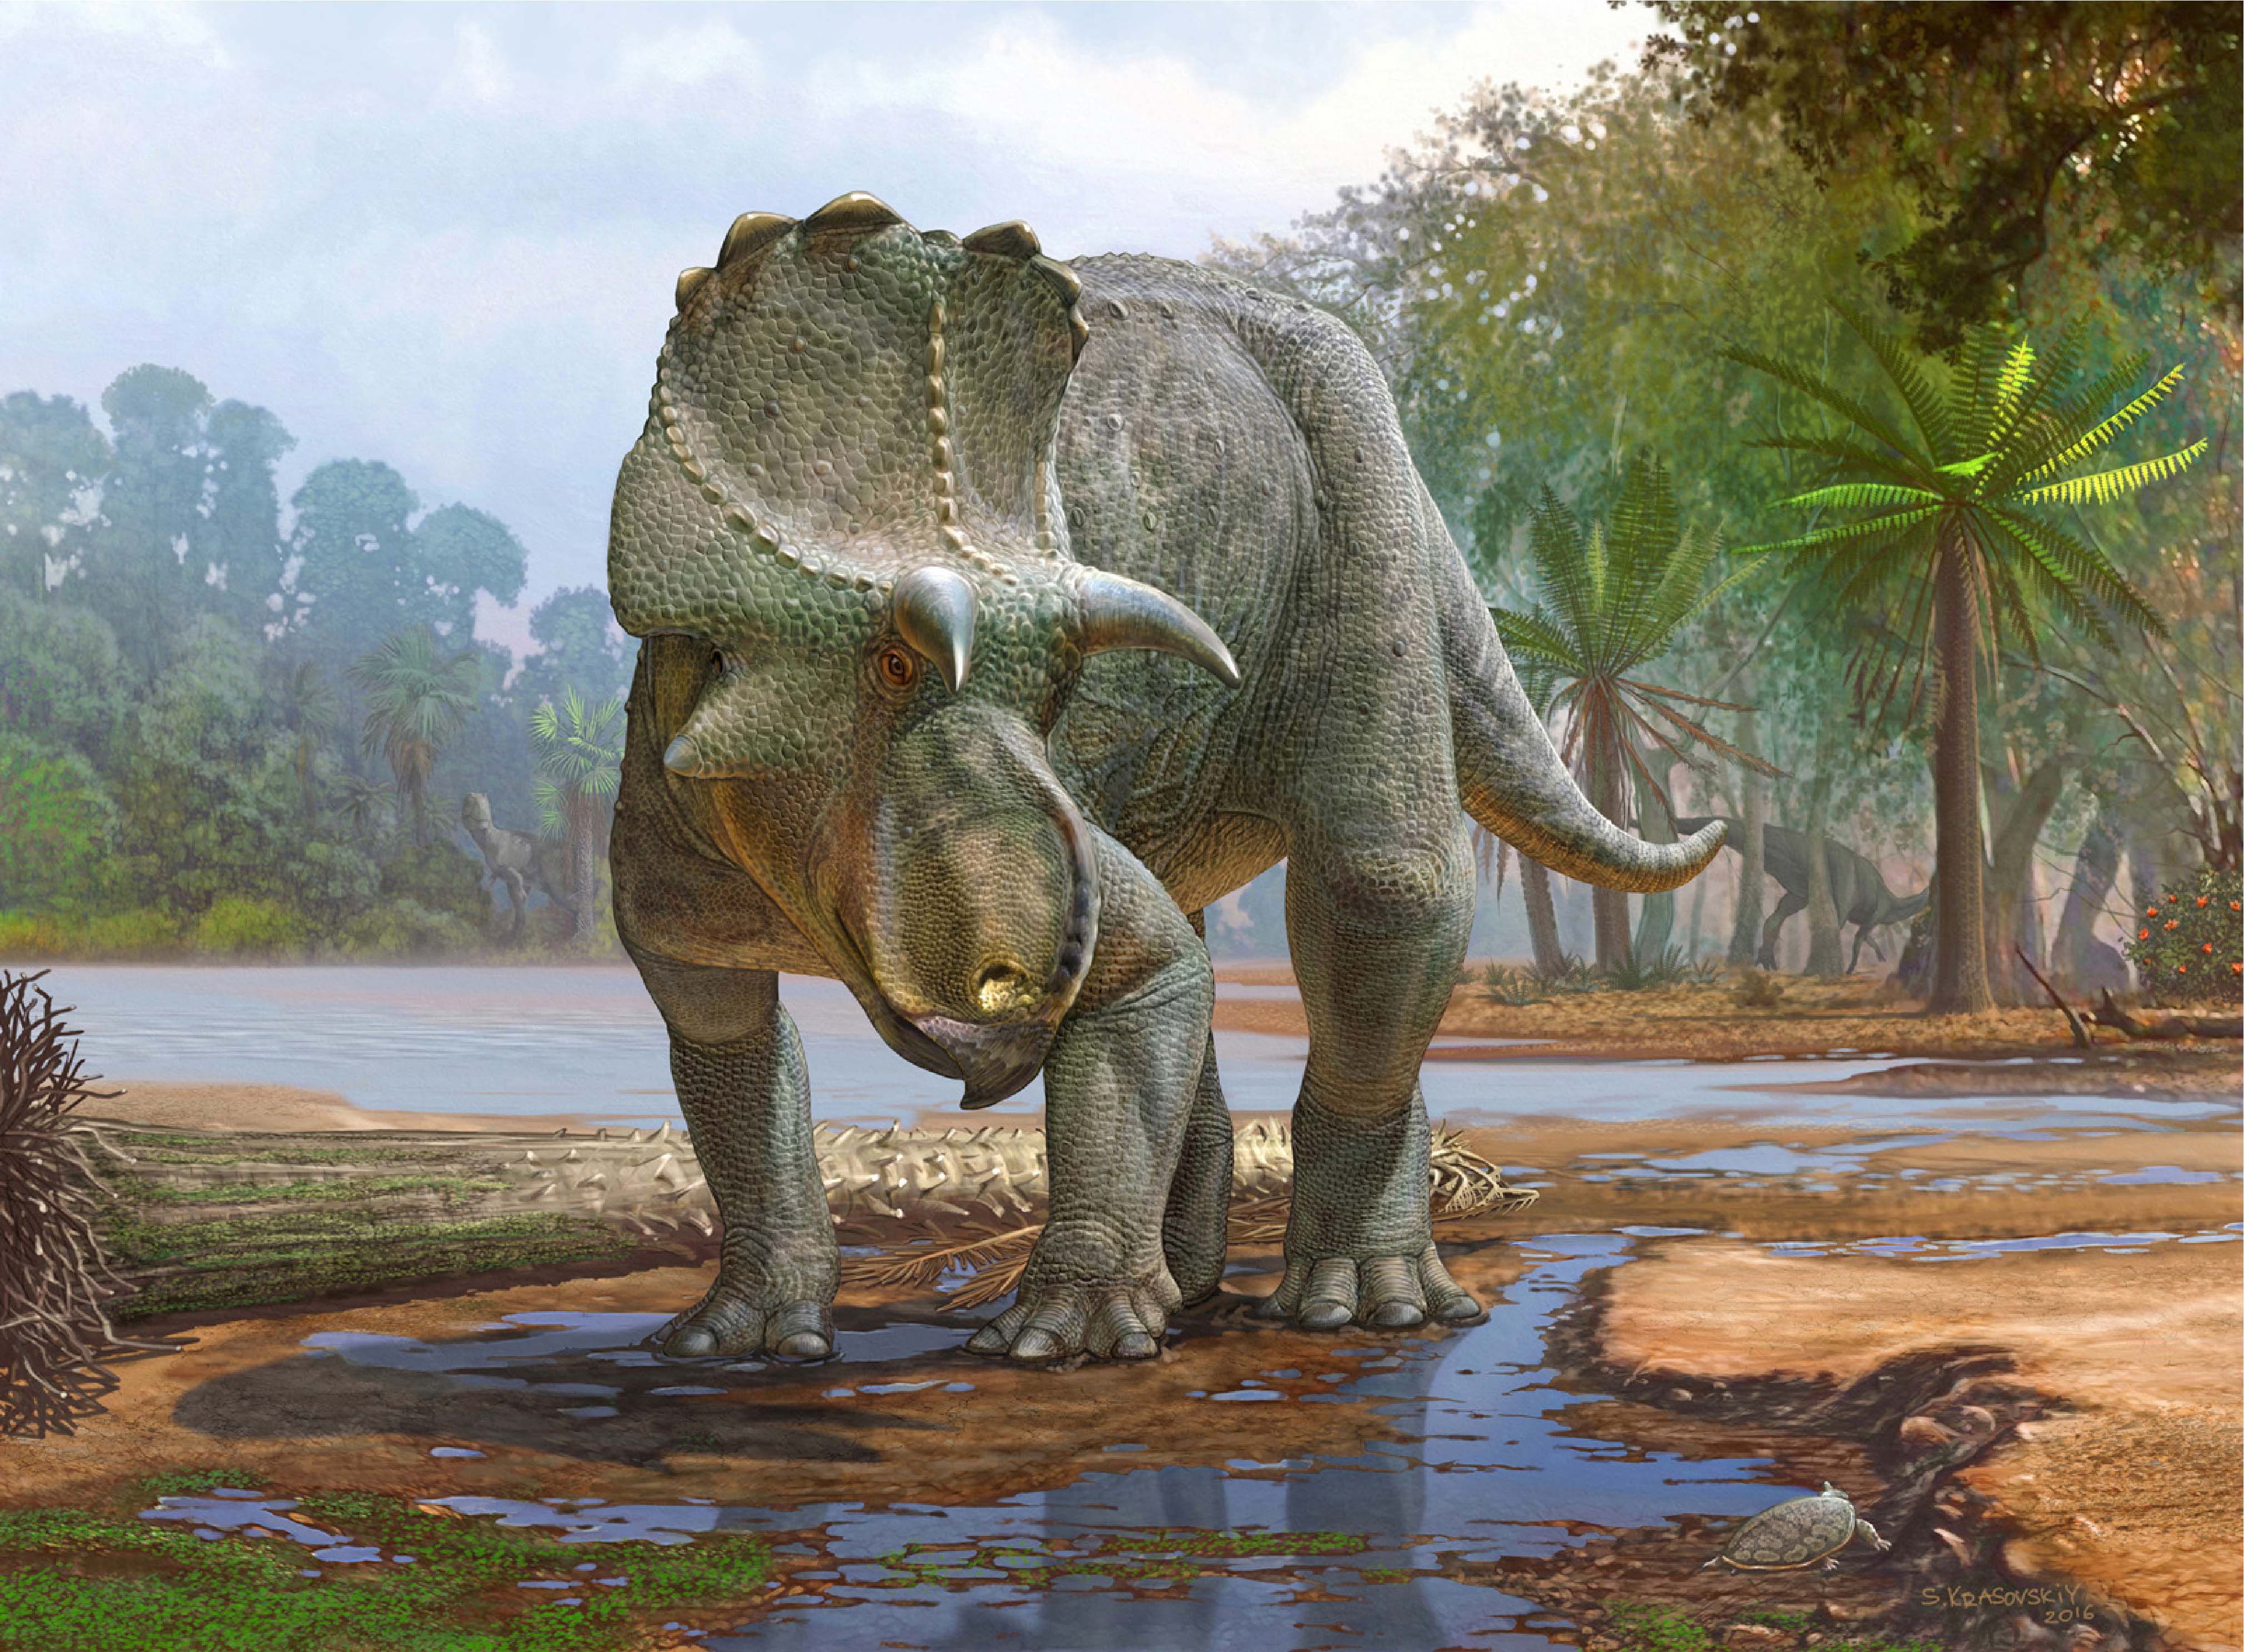 Illustration of a horned dinosaur in a jungle setting